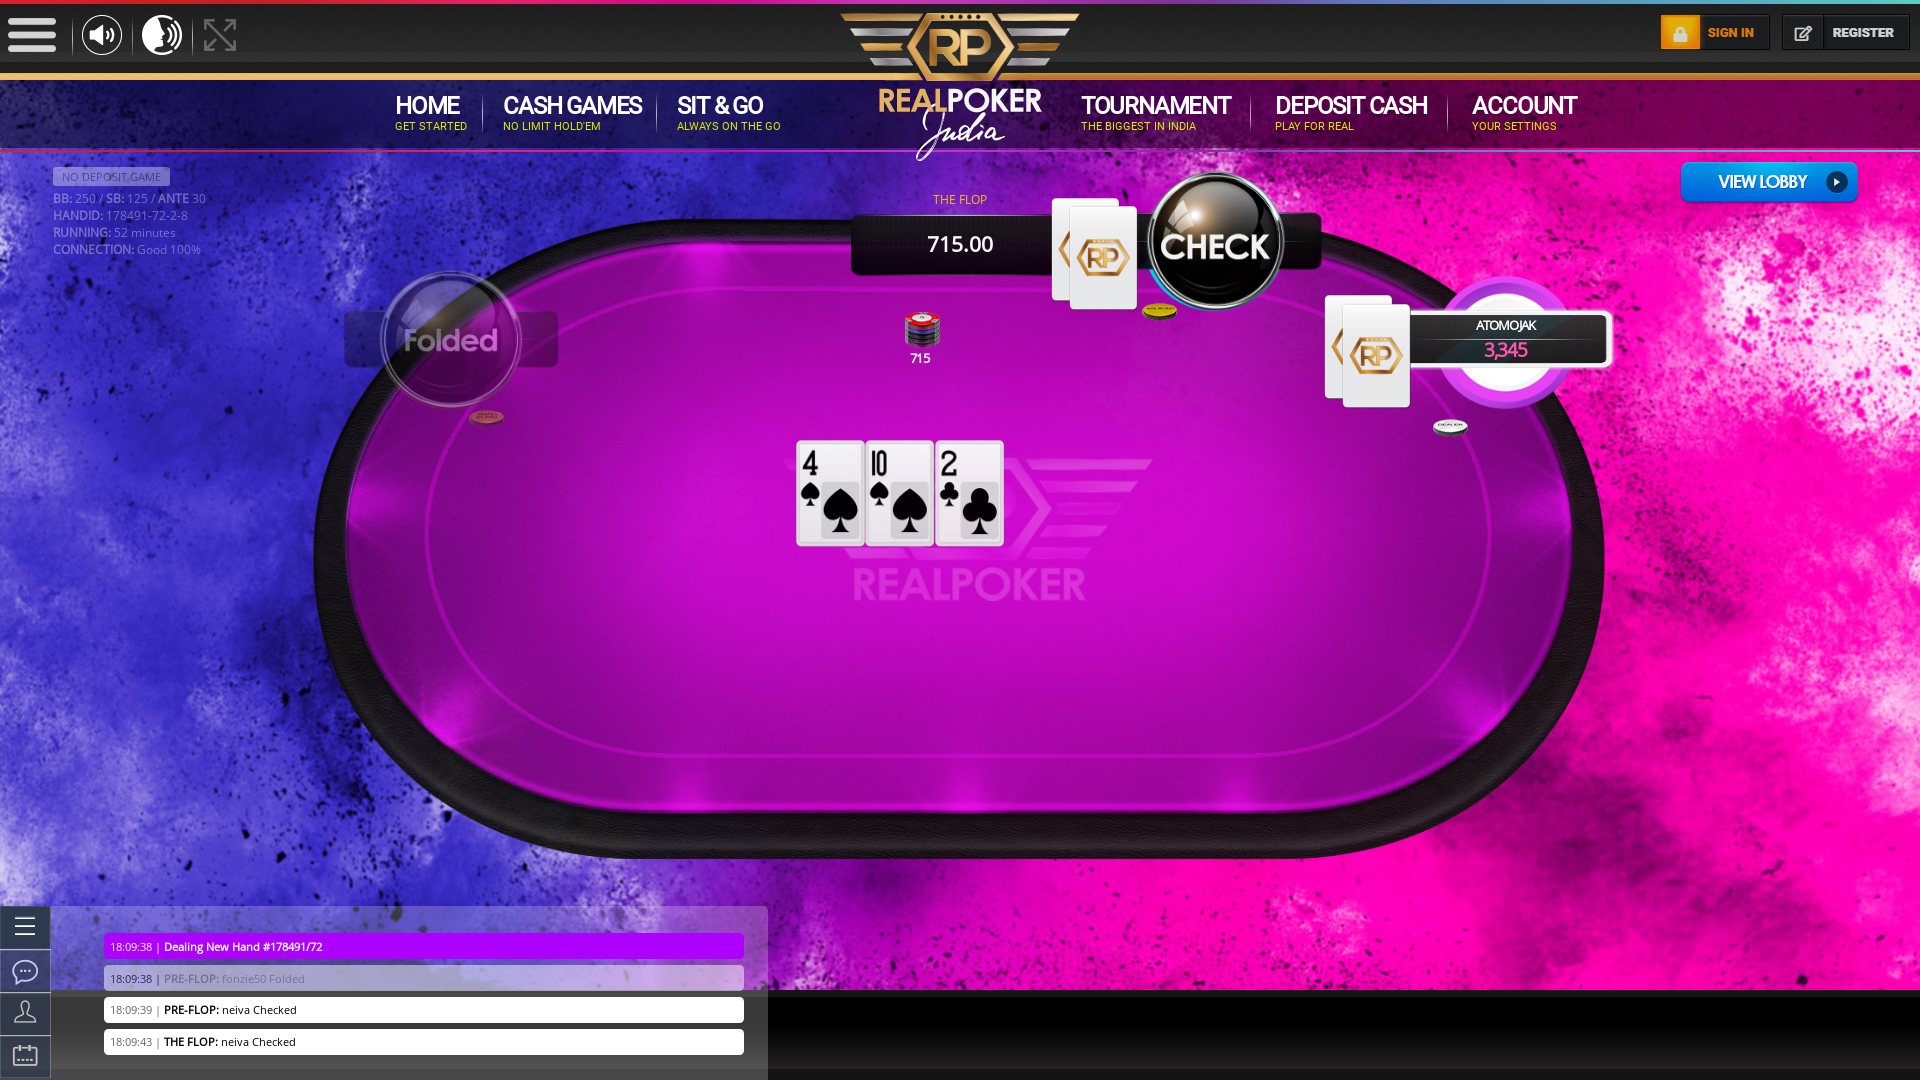 Real Indian poker on a 10 player table in the 52nd minute of the game